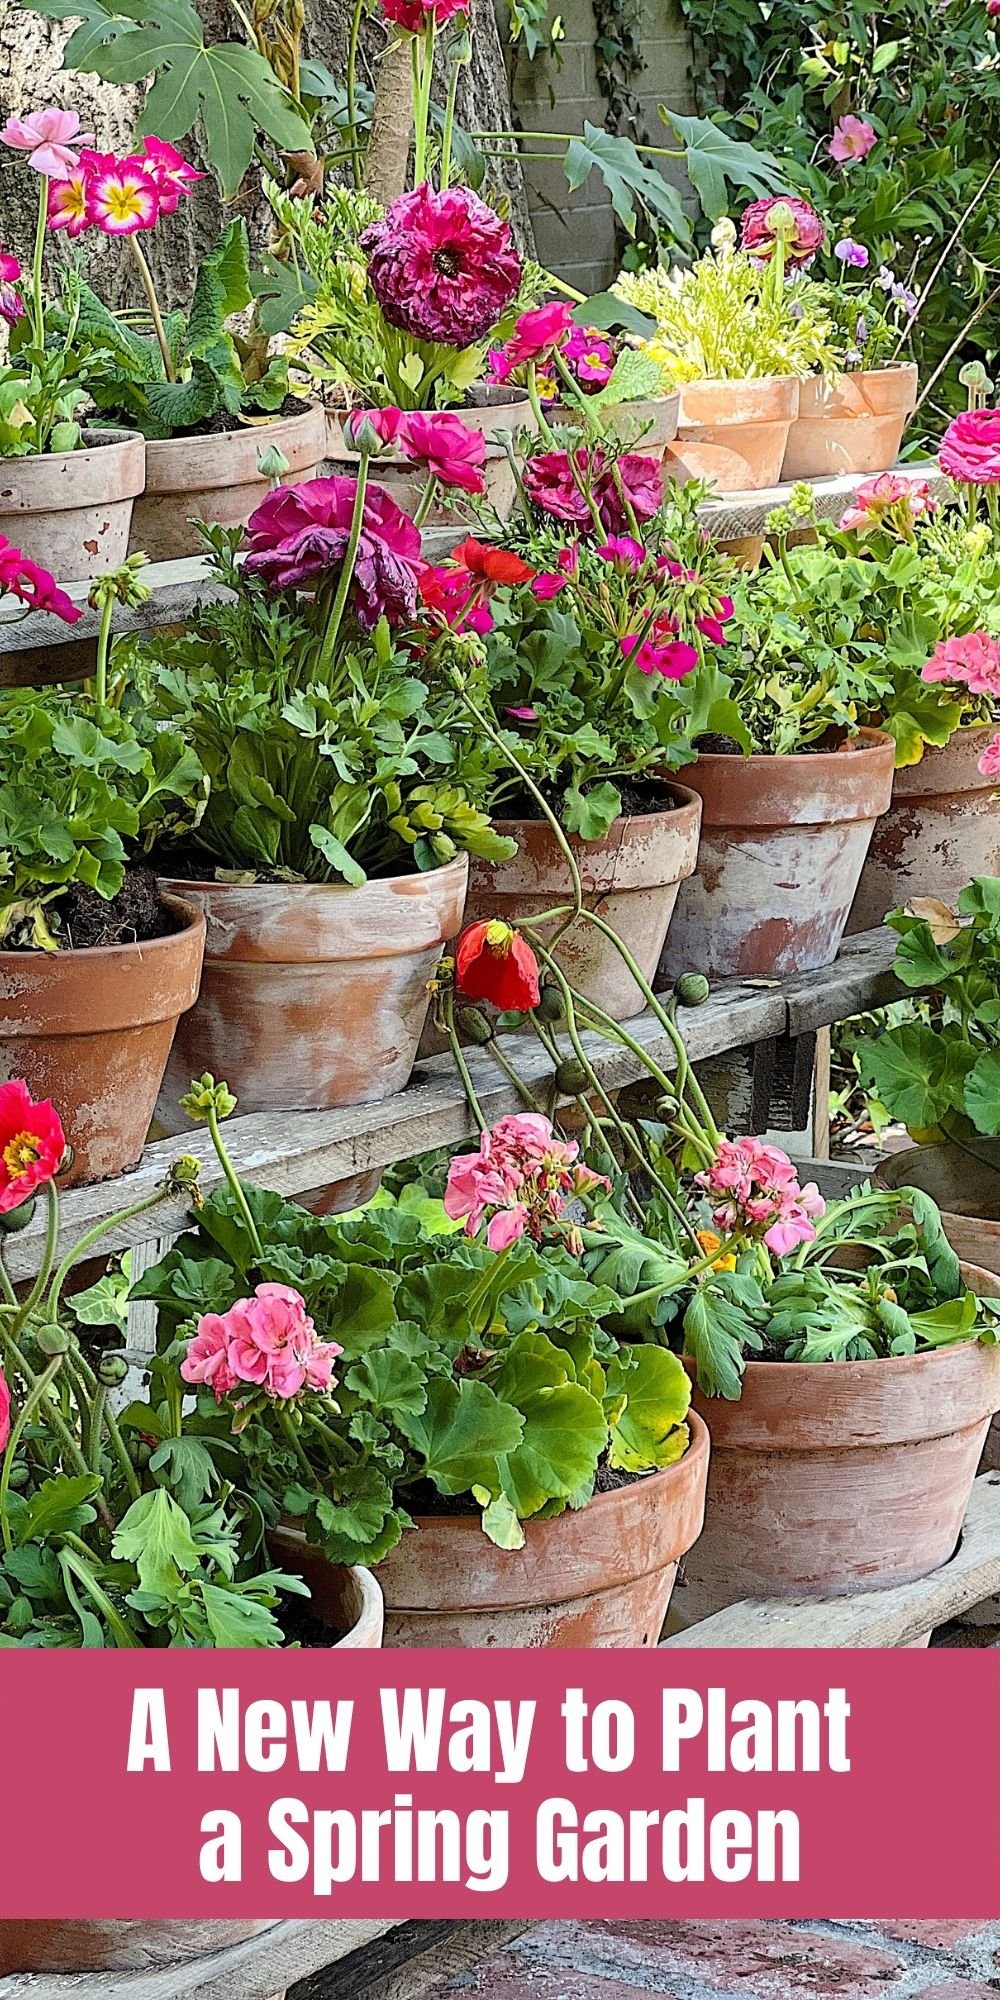 I am getting my spring garden ready by preparing my pots and raised beds with my new favorite potting mix. I am also adding a cutting garden!